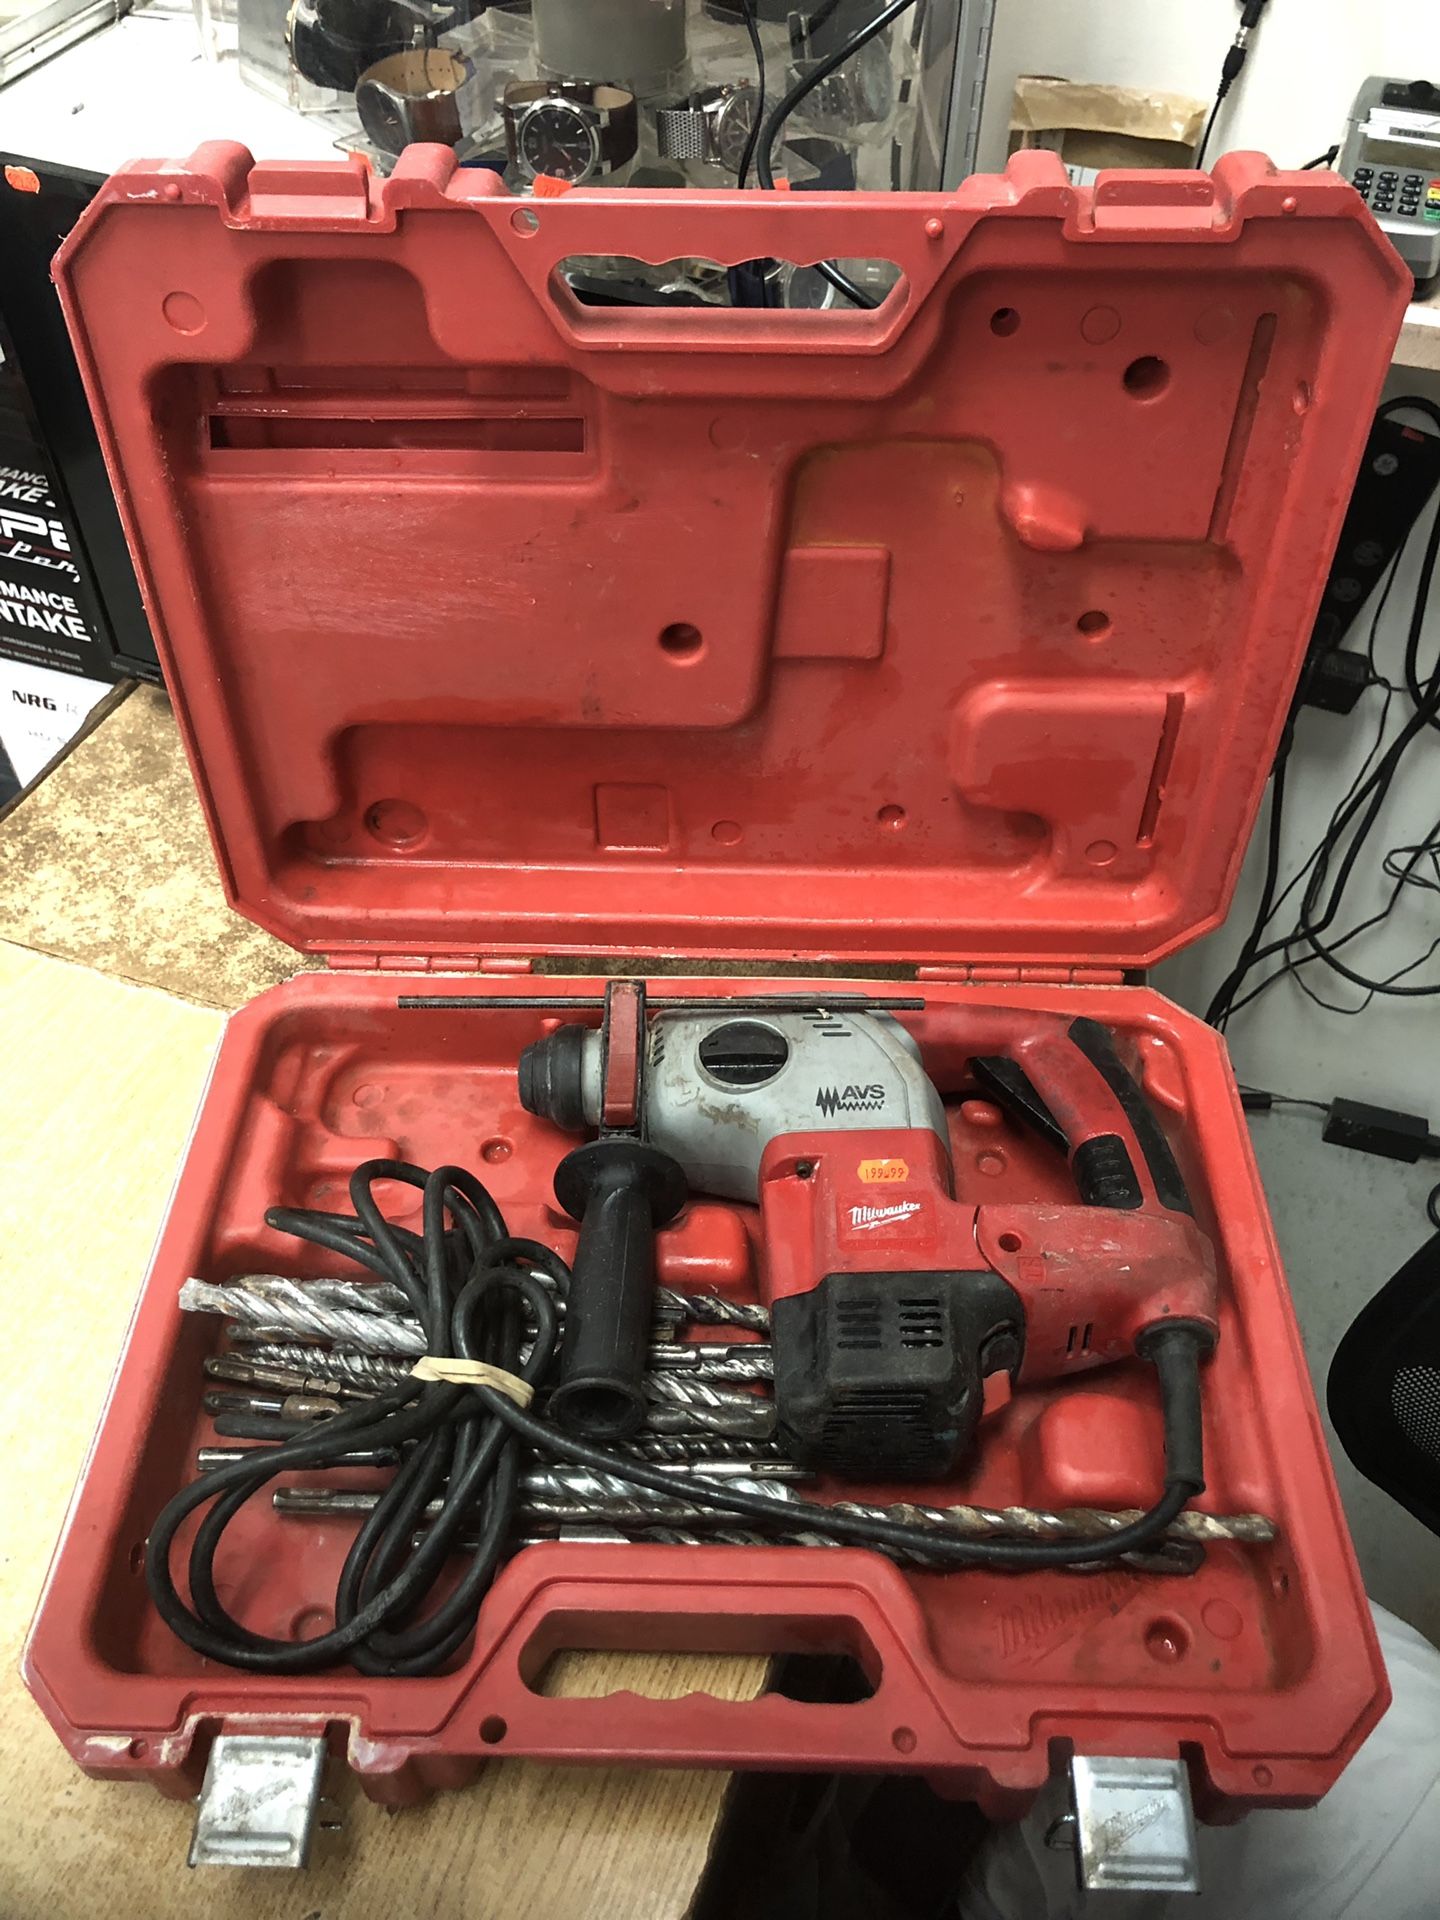 Milwaukee 5363-21 1-Inch Compact SDS Rotary Hammer Drill w/ Case & Extra Bits